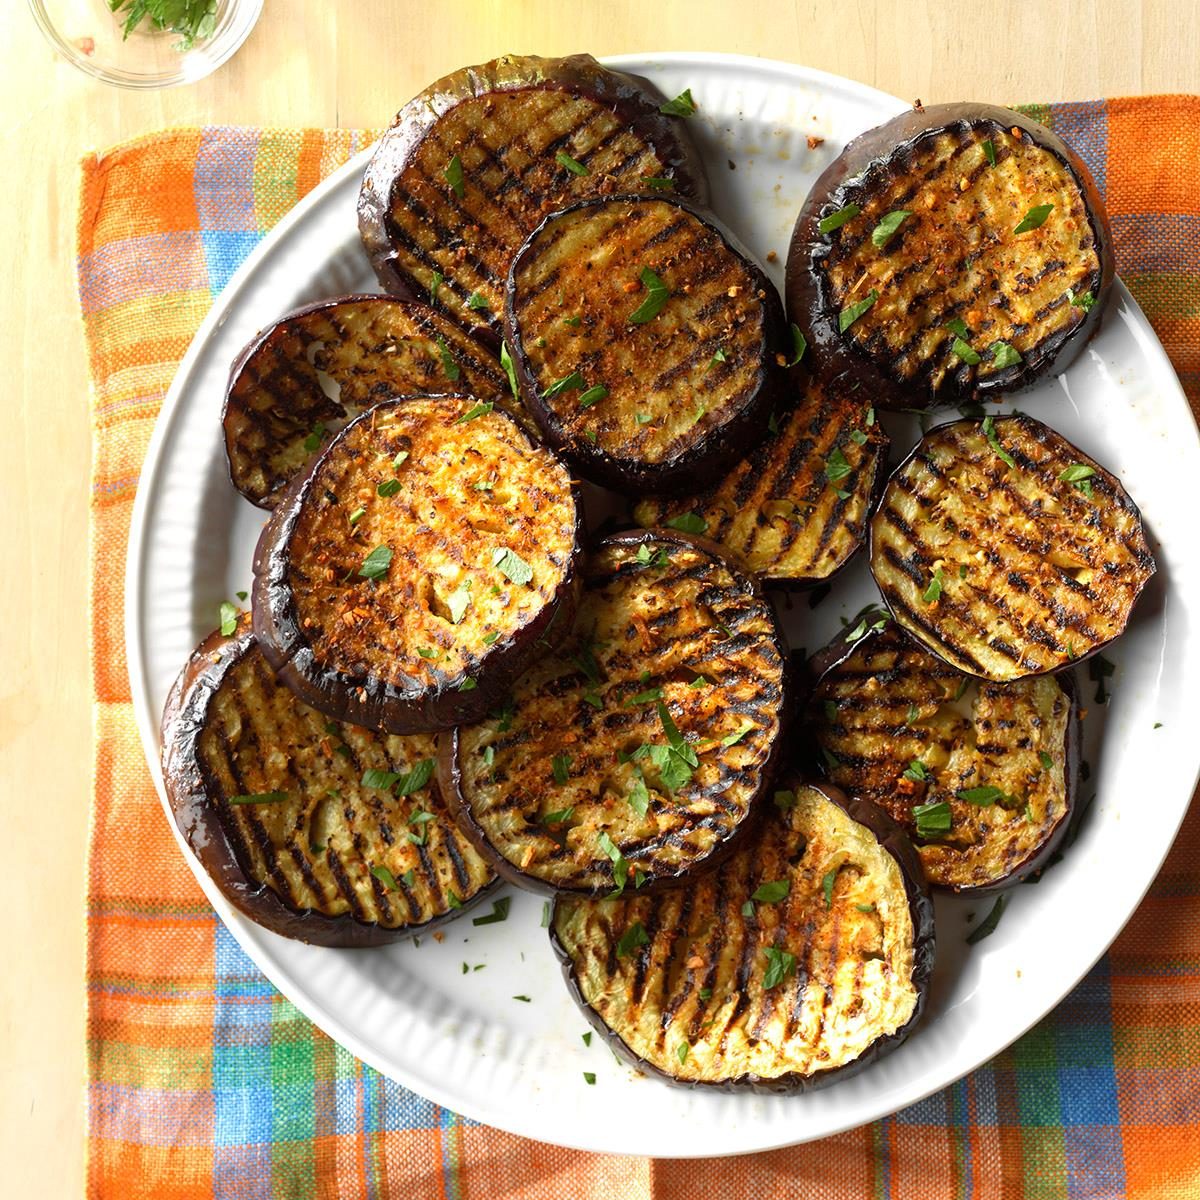 Spicy grilled eggplant recipe